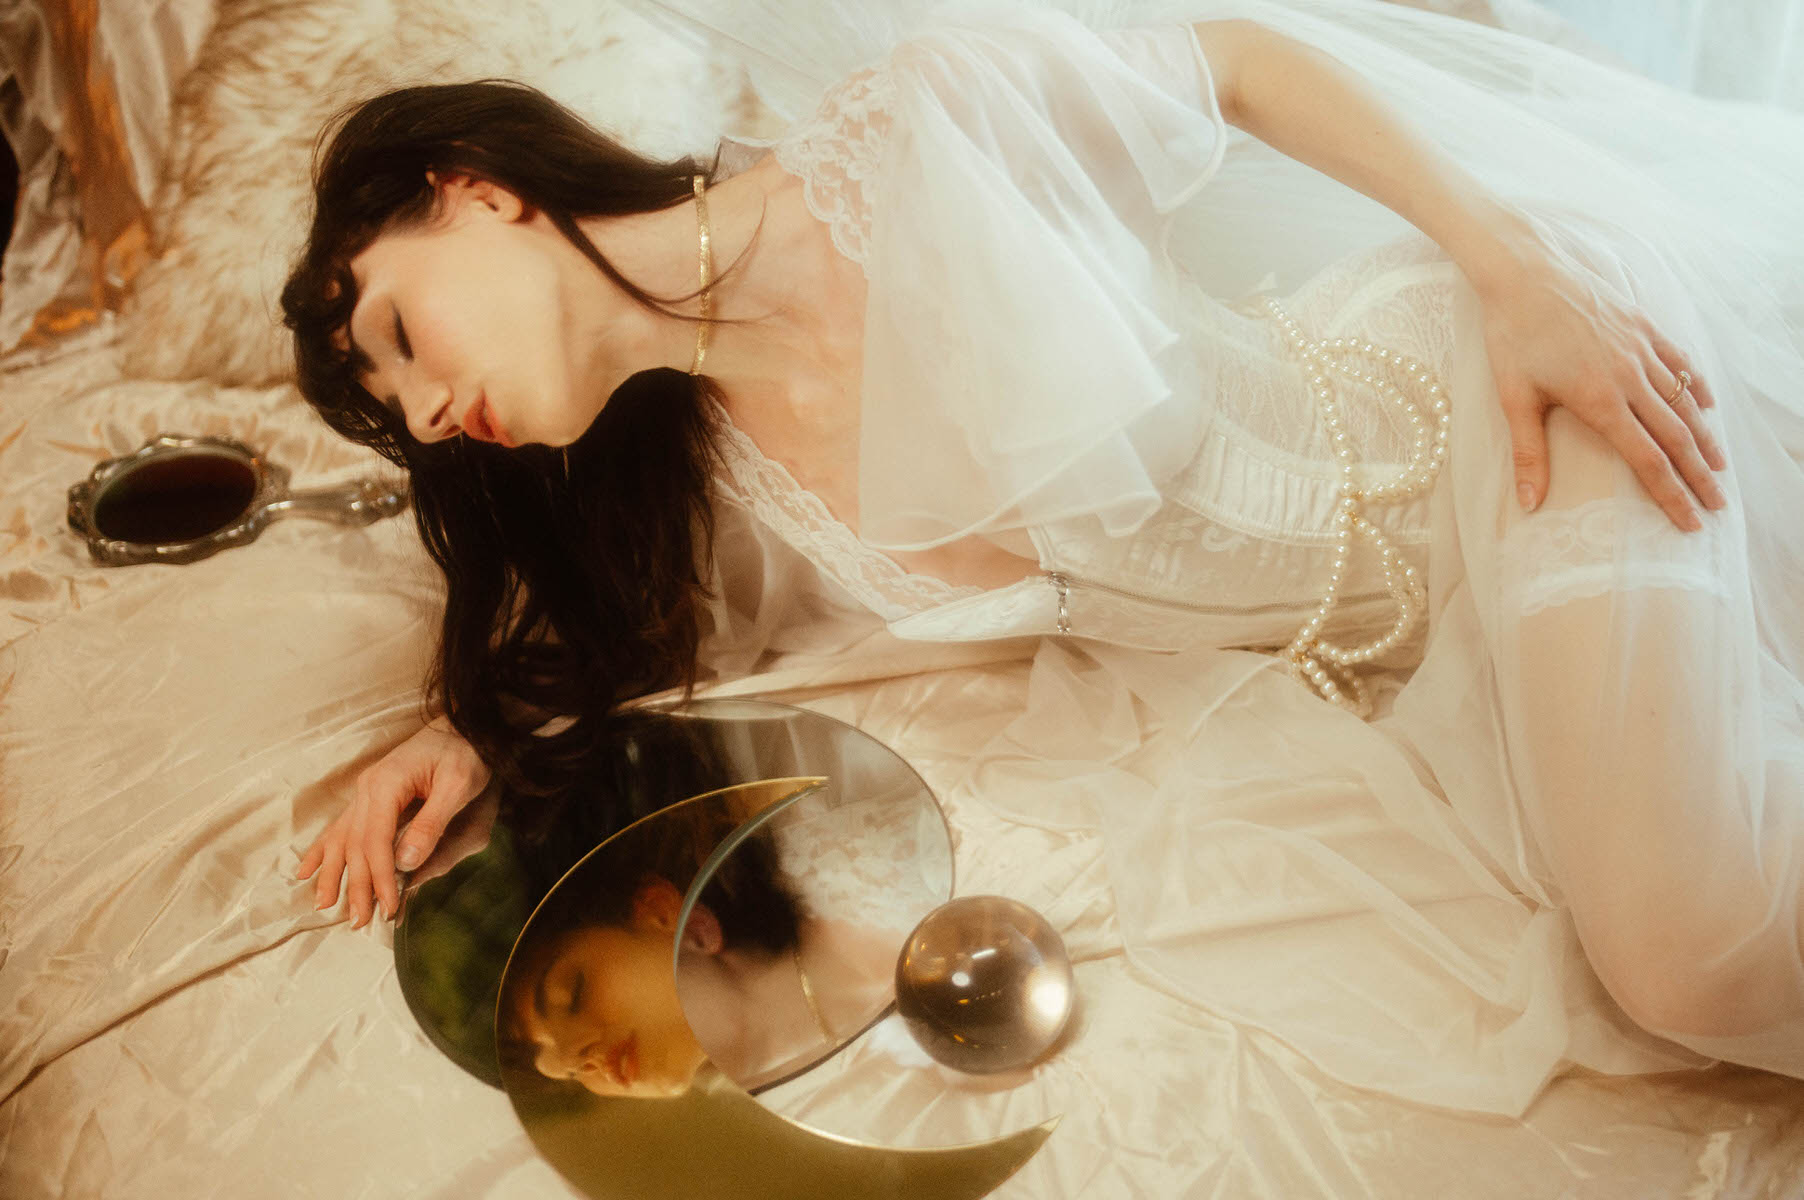 A woman dressed in a white gown and angel wings lies on a bed, her reflection visible in a curved mirror placed beside her.